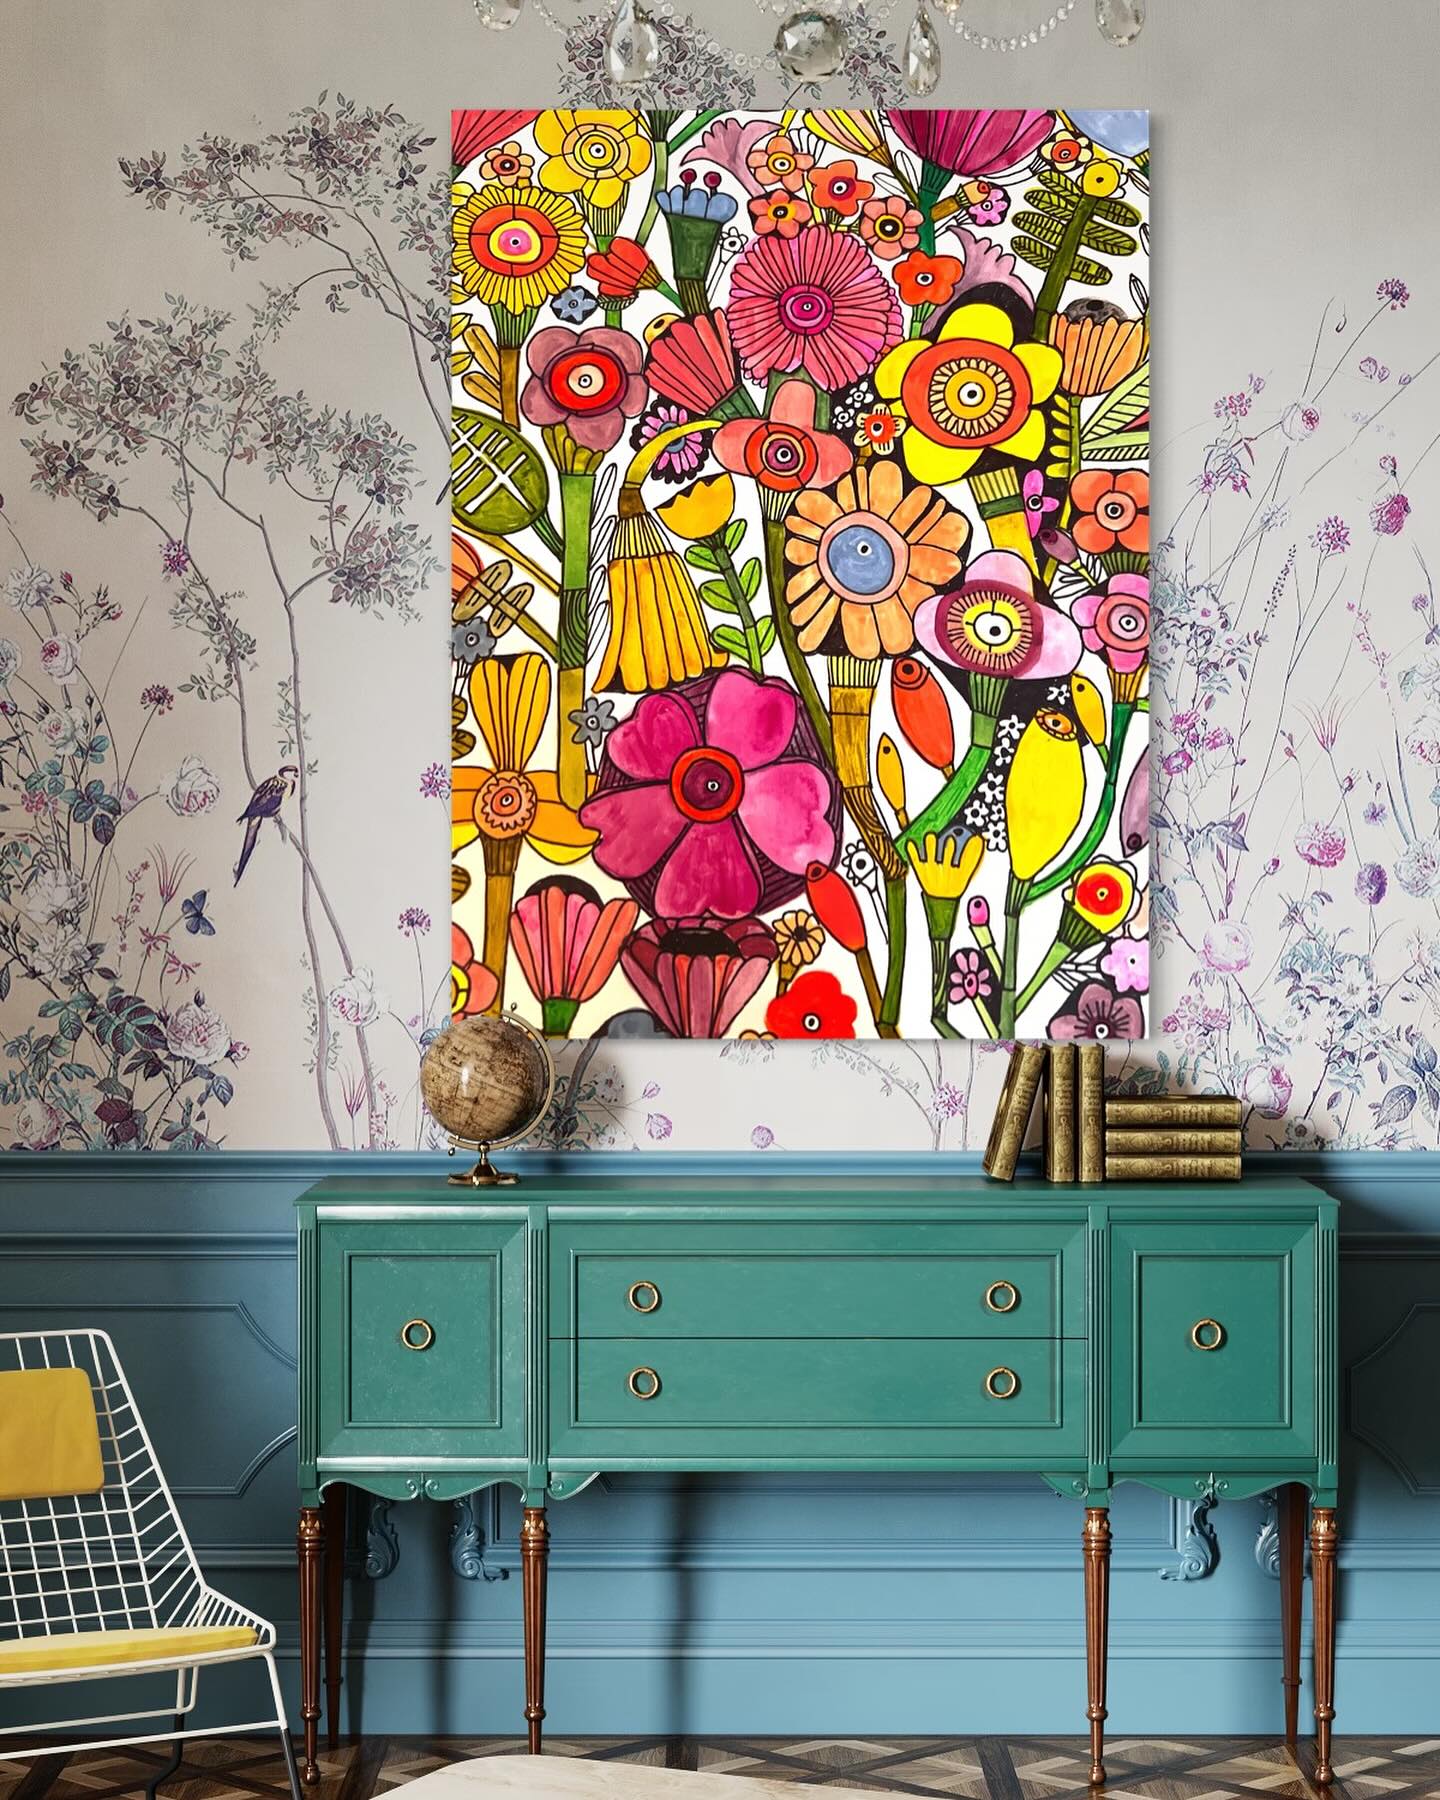 flowers painted in colorful and abstract style add a funky vibe to this living space showcasing a console table with drawers.